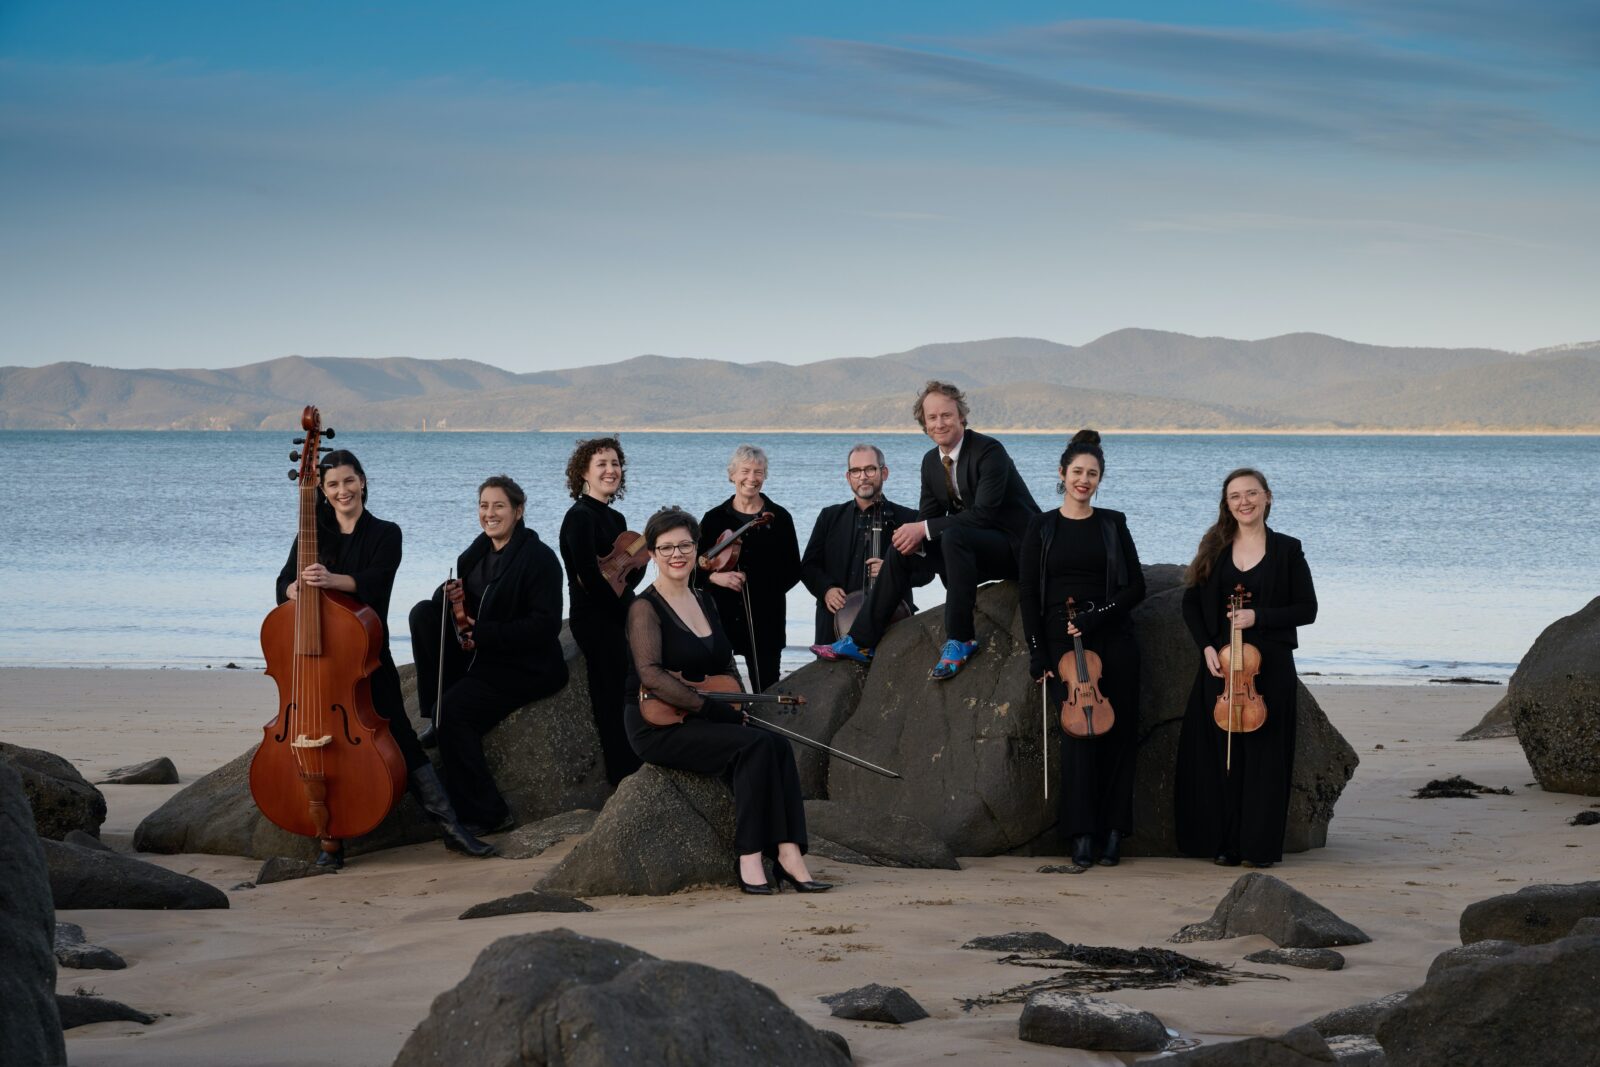 Nine smiling people gather around a group of rocks. They hold violins and other string instruments